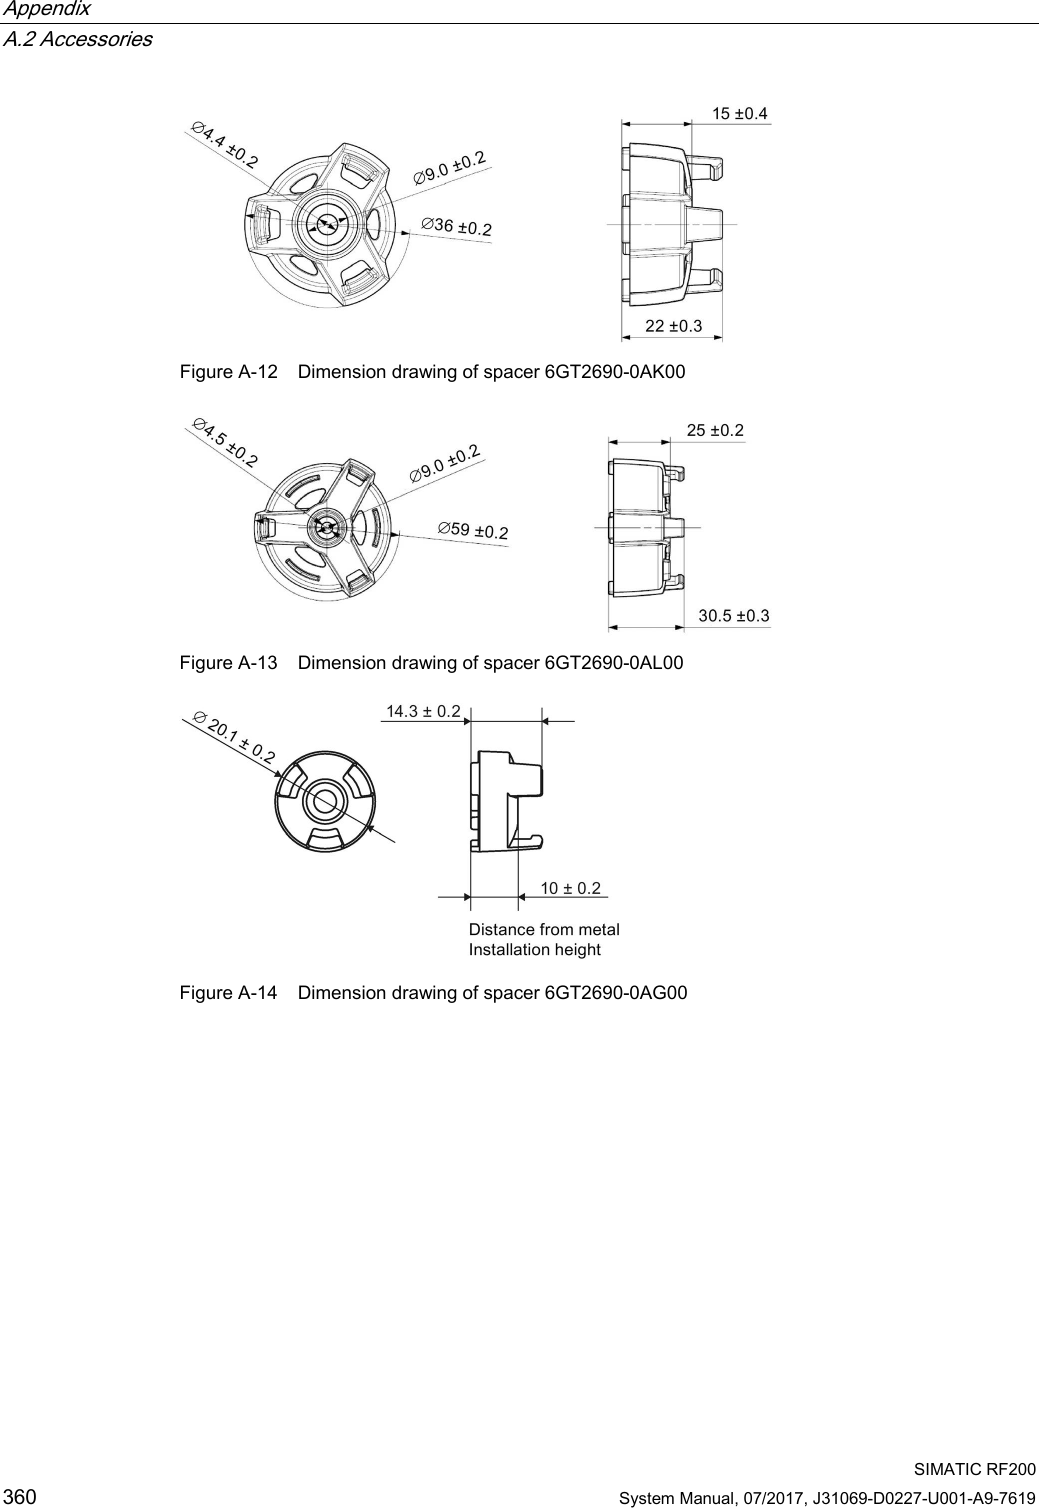 Appendix   A.2 Accessories  SIMATIC RF200 360 System Manual, 07/2017, J31069-D0227-U001-A9-7619  Figure A-12 Dimension drawing of spacer 6GT2690-0AK00  Figure A-13  Dimension drawing of spacer 6GT2690-0AL00  Figure A-14 Dimension drawing of spacer 6GT2690-0AG00 